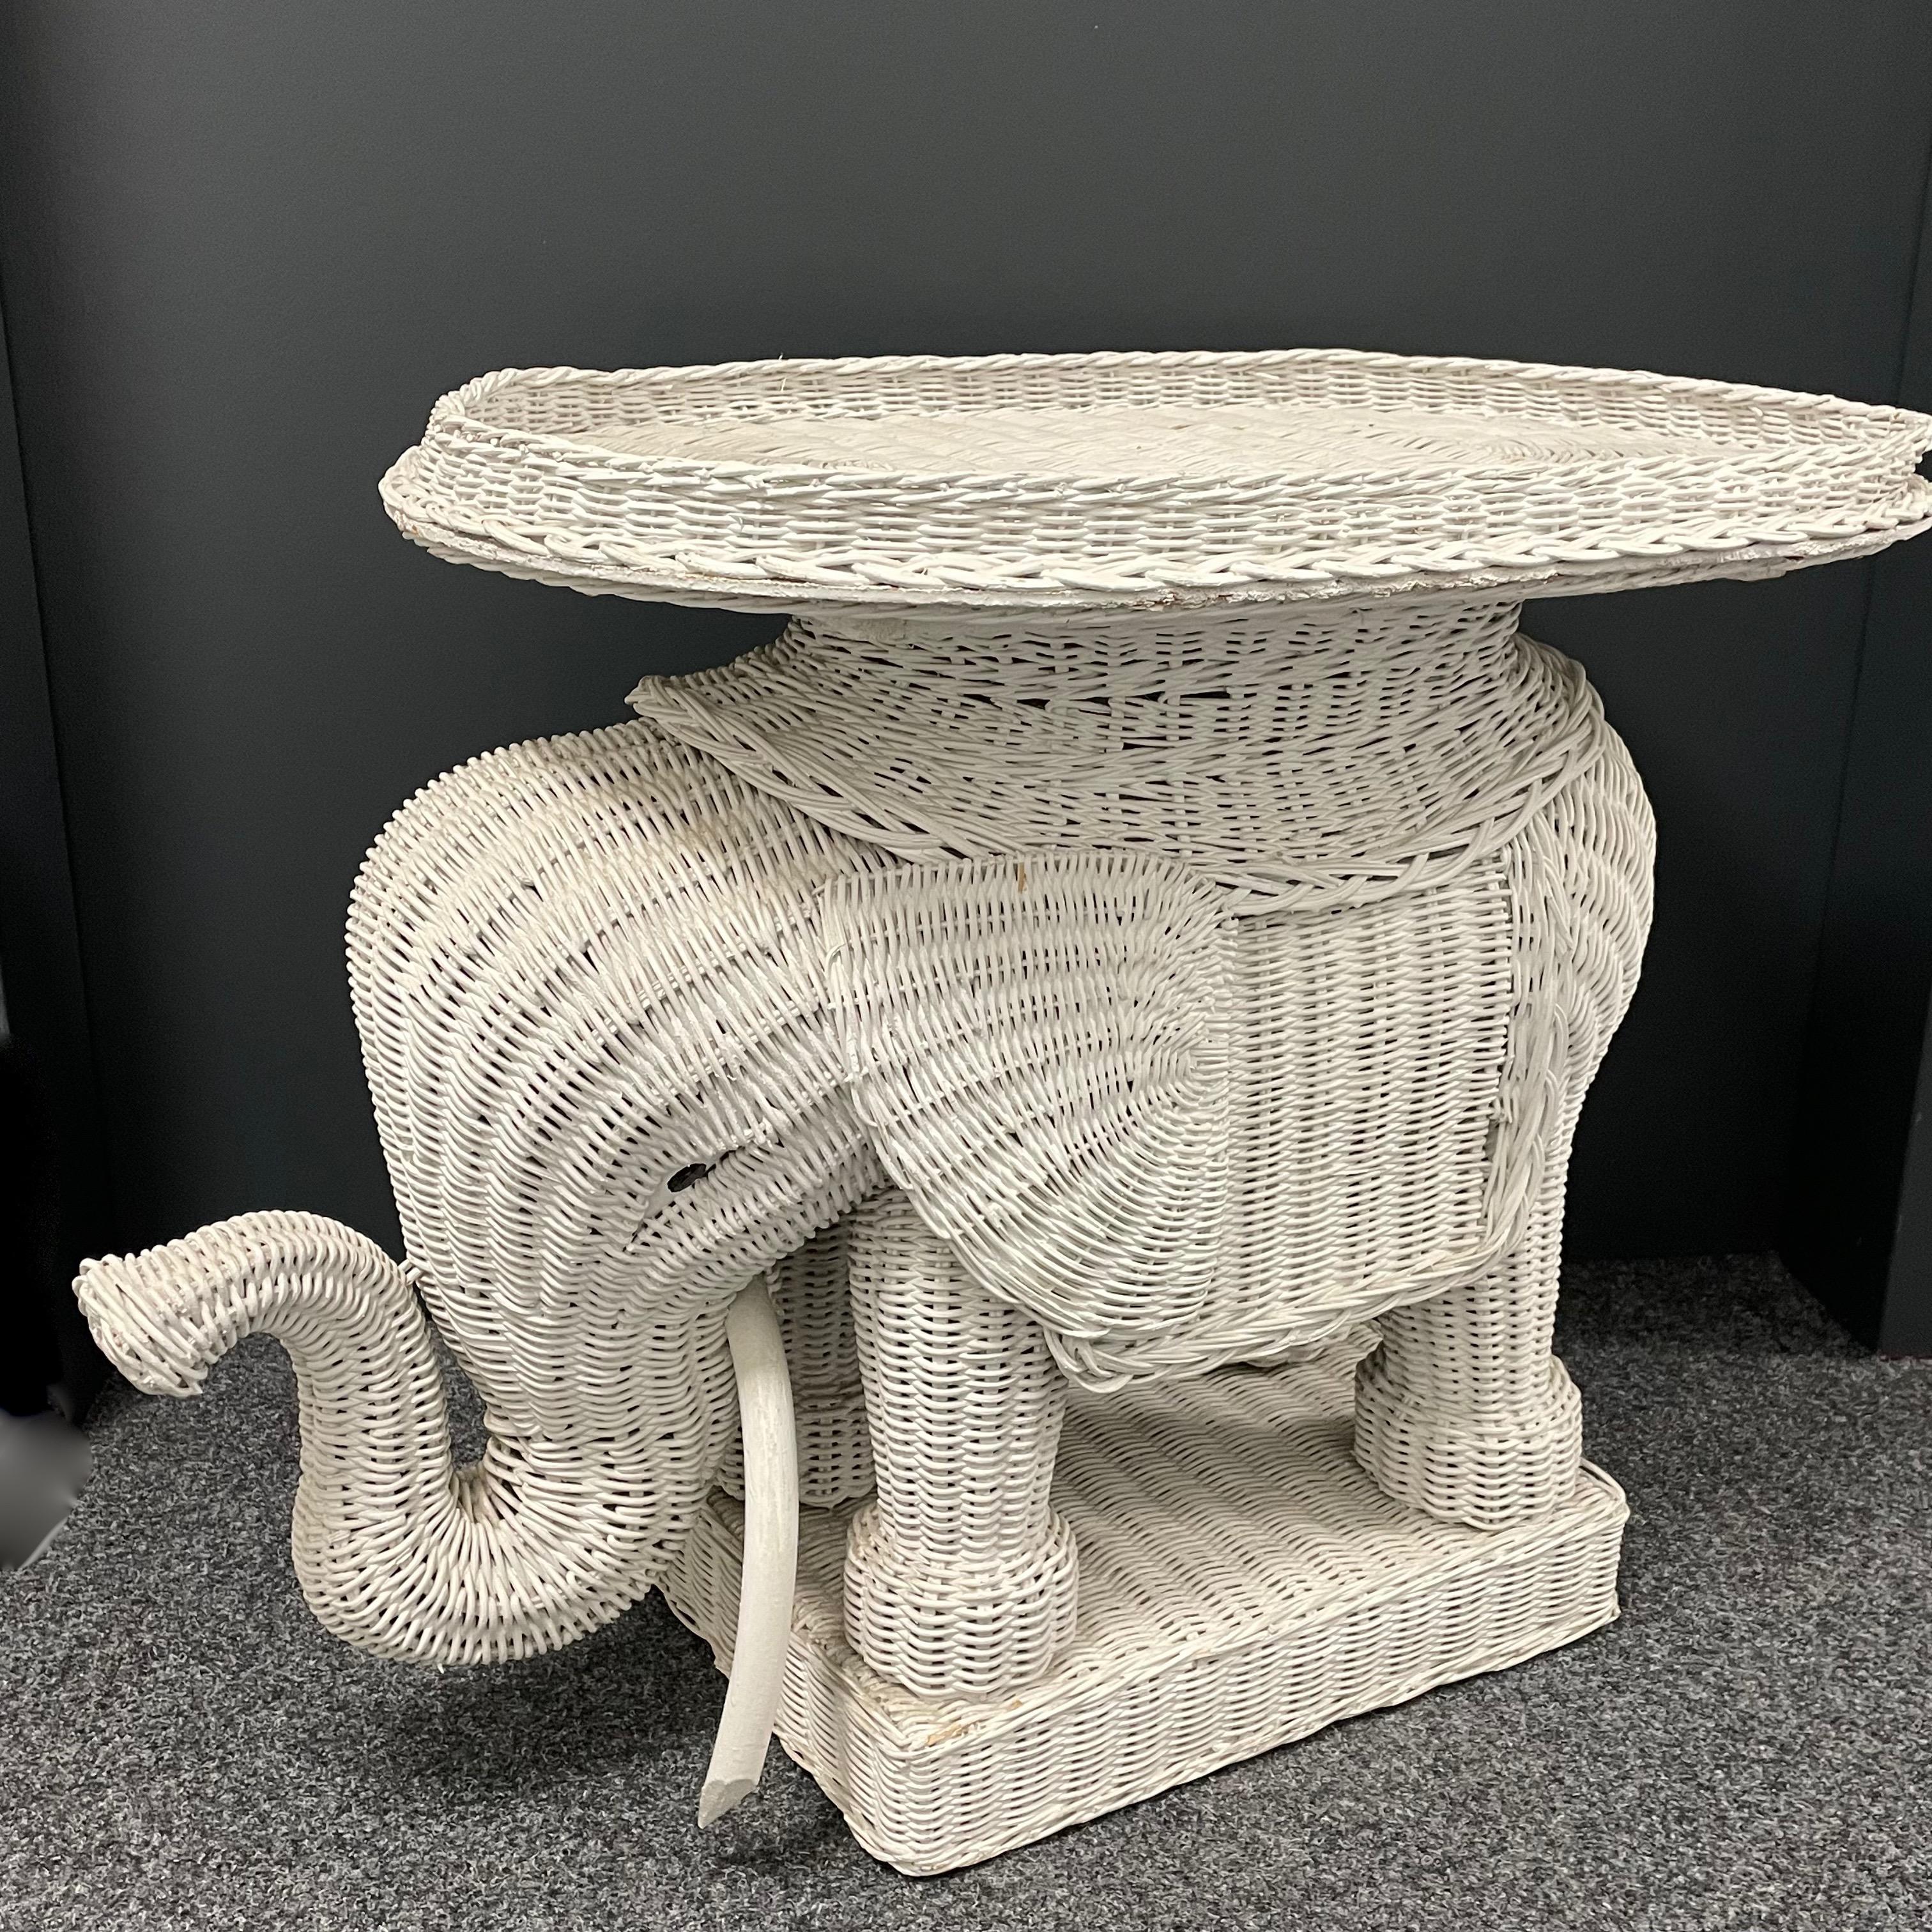 Hollywood Regency Stunning White Rattan Wicker Elephant Side Table with Tray, France, 1960s